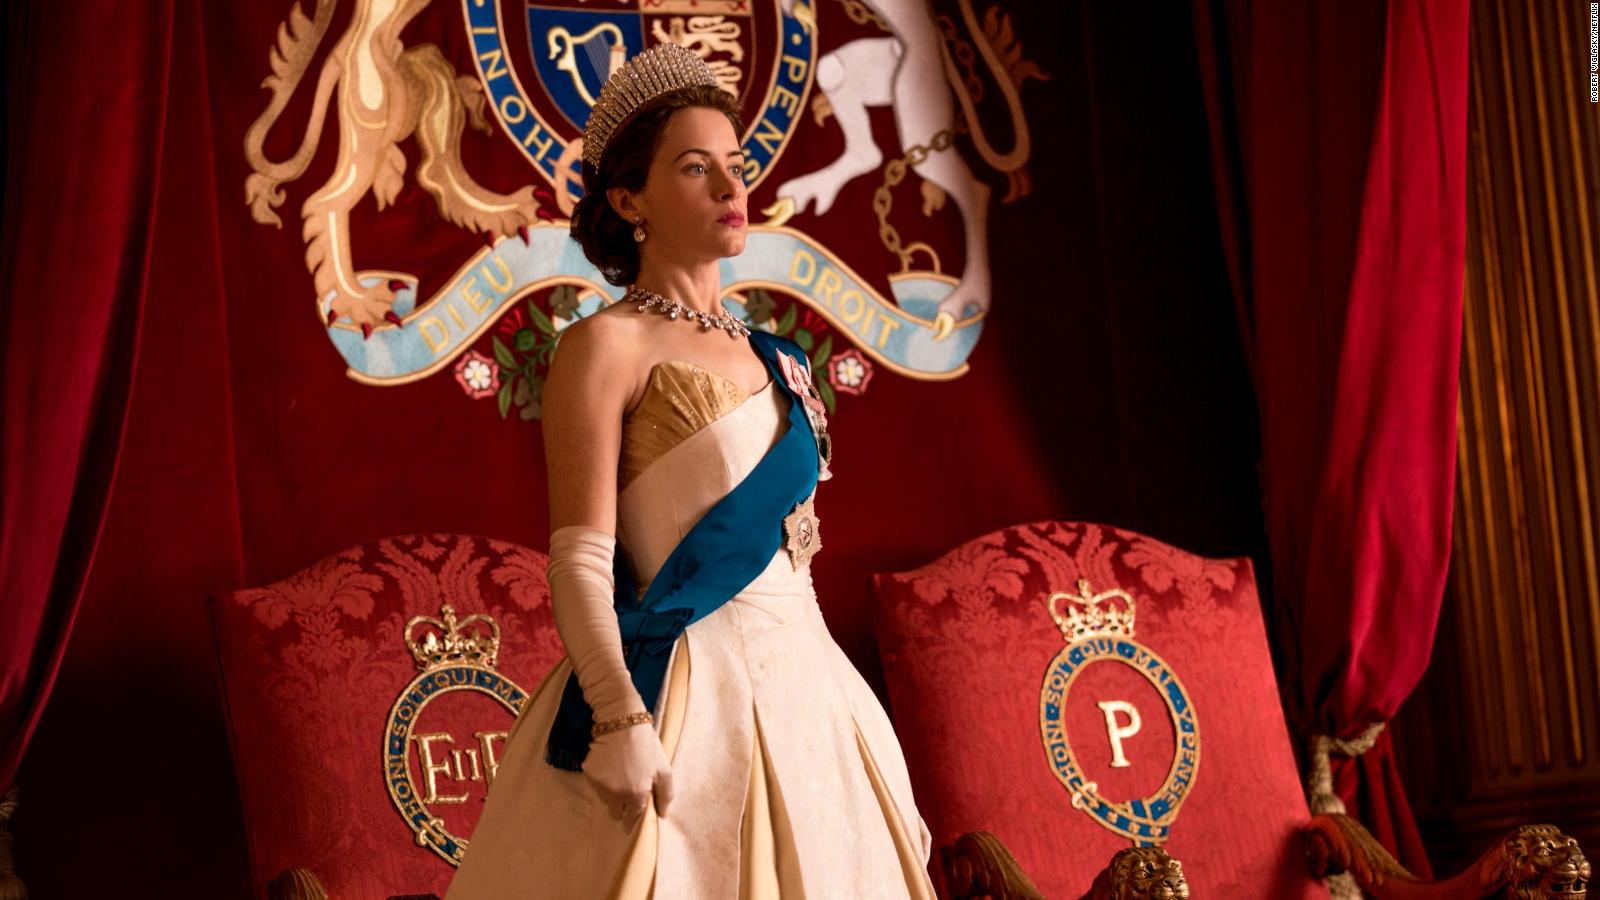 On Pay, 'the Crown' Was Unfair To The Queen - Crown Queen Elizabeth 2 , HD Wallpaper & Backgrounds